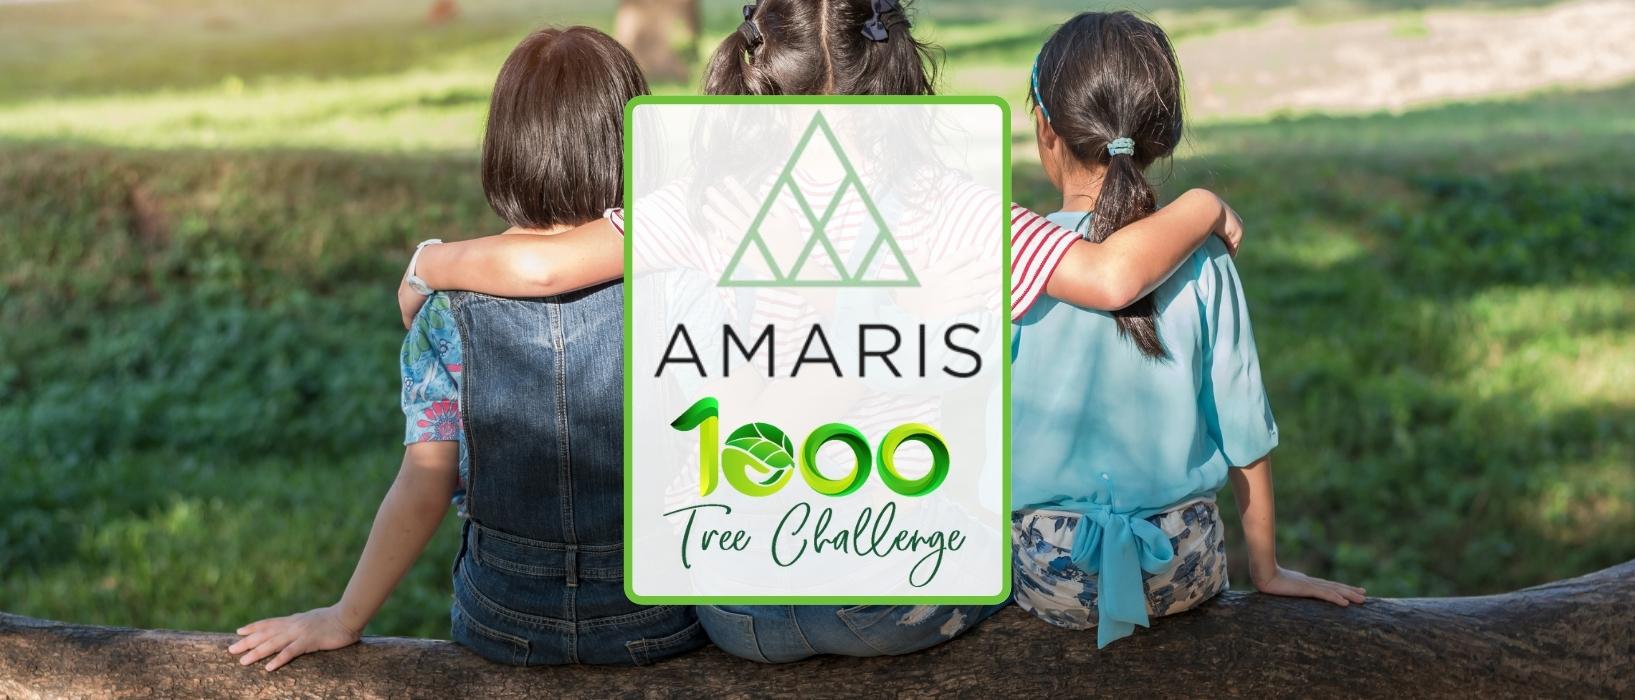 three young girls from behind sitting on fallen tree trunk, middle girl has her arm around the other two - amaris and 1000 tree challenge logos are infront